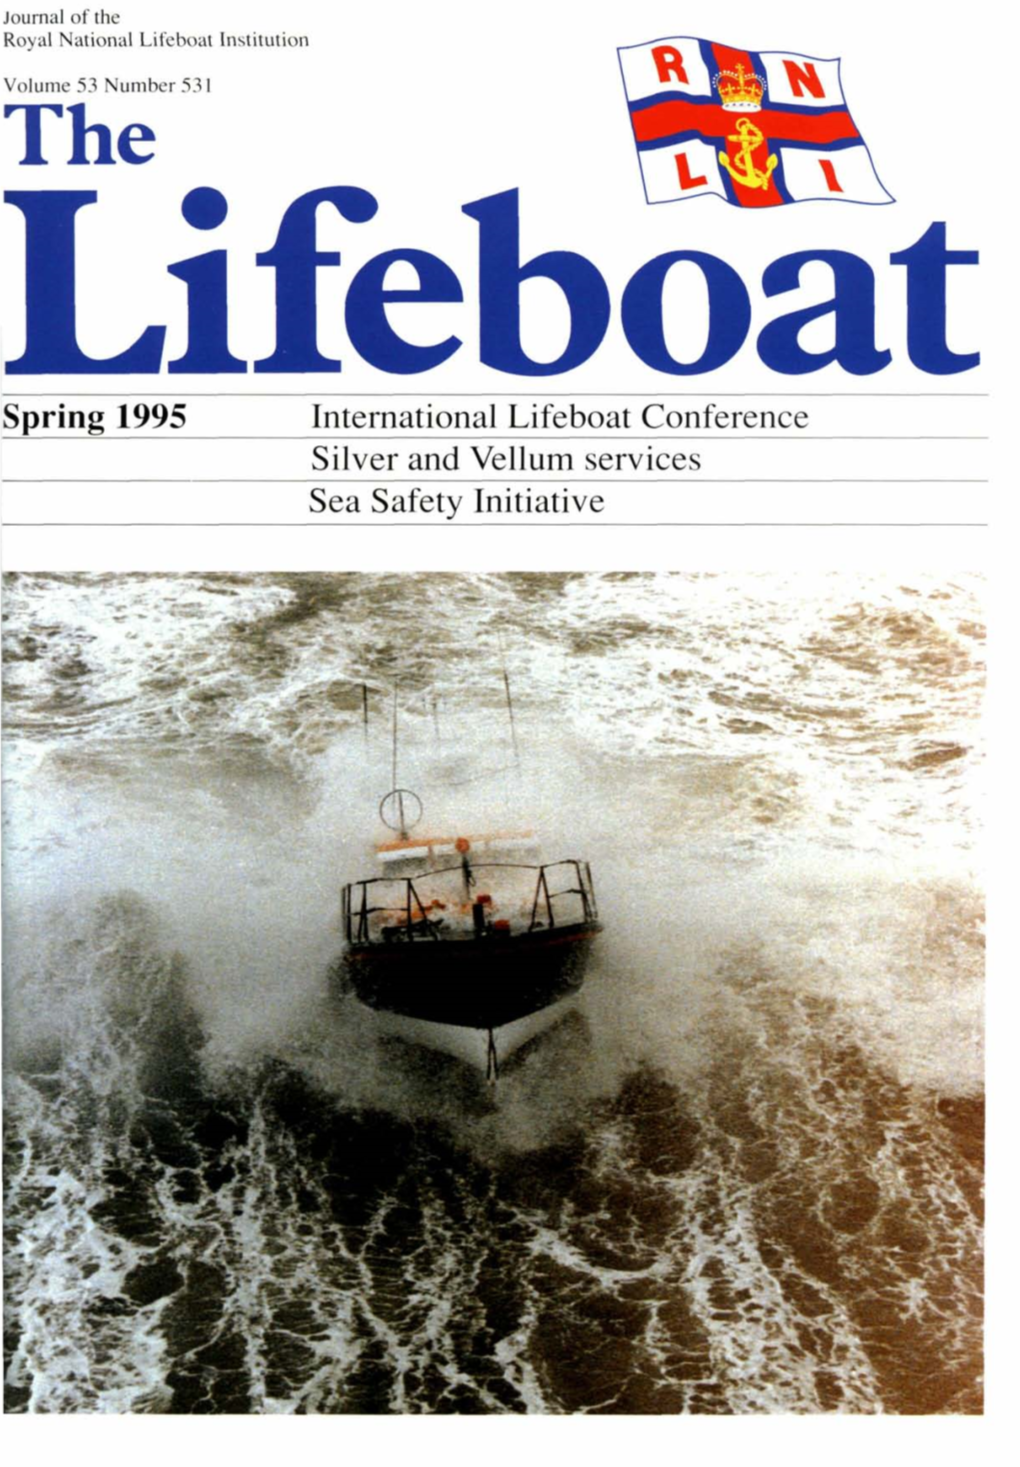 Spring 1995 International Lifeboat Conference Silver and Vellum Services Sea Safety Initiative Last Yean Legacies Helped Us Launch Over 5,000 Times